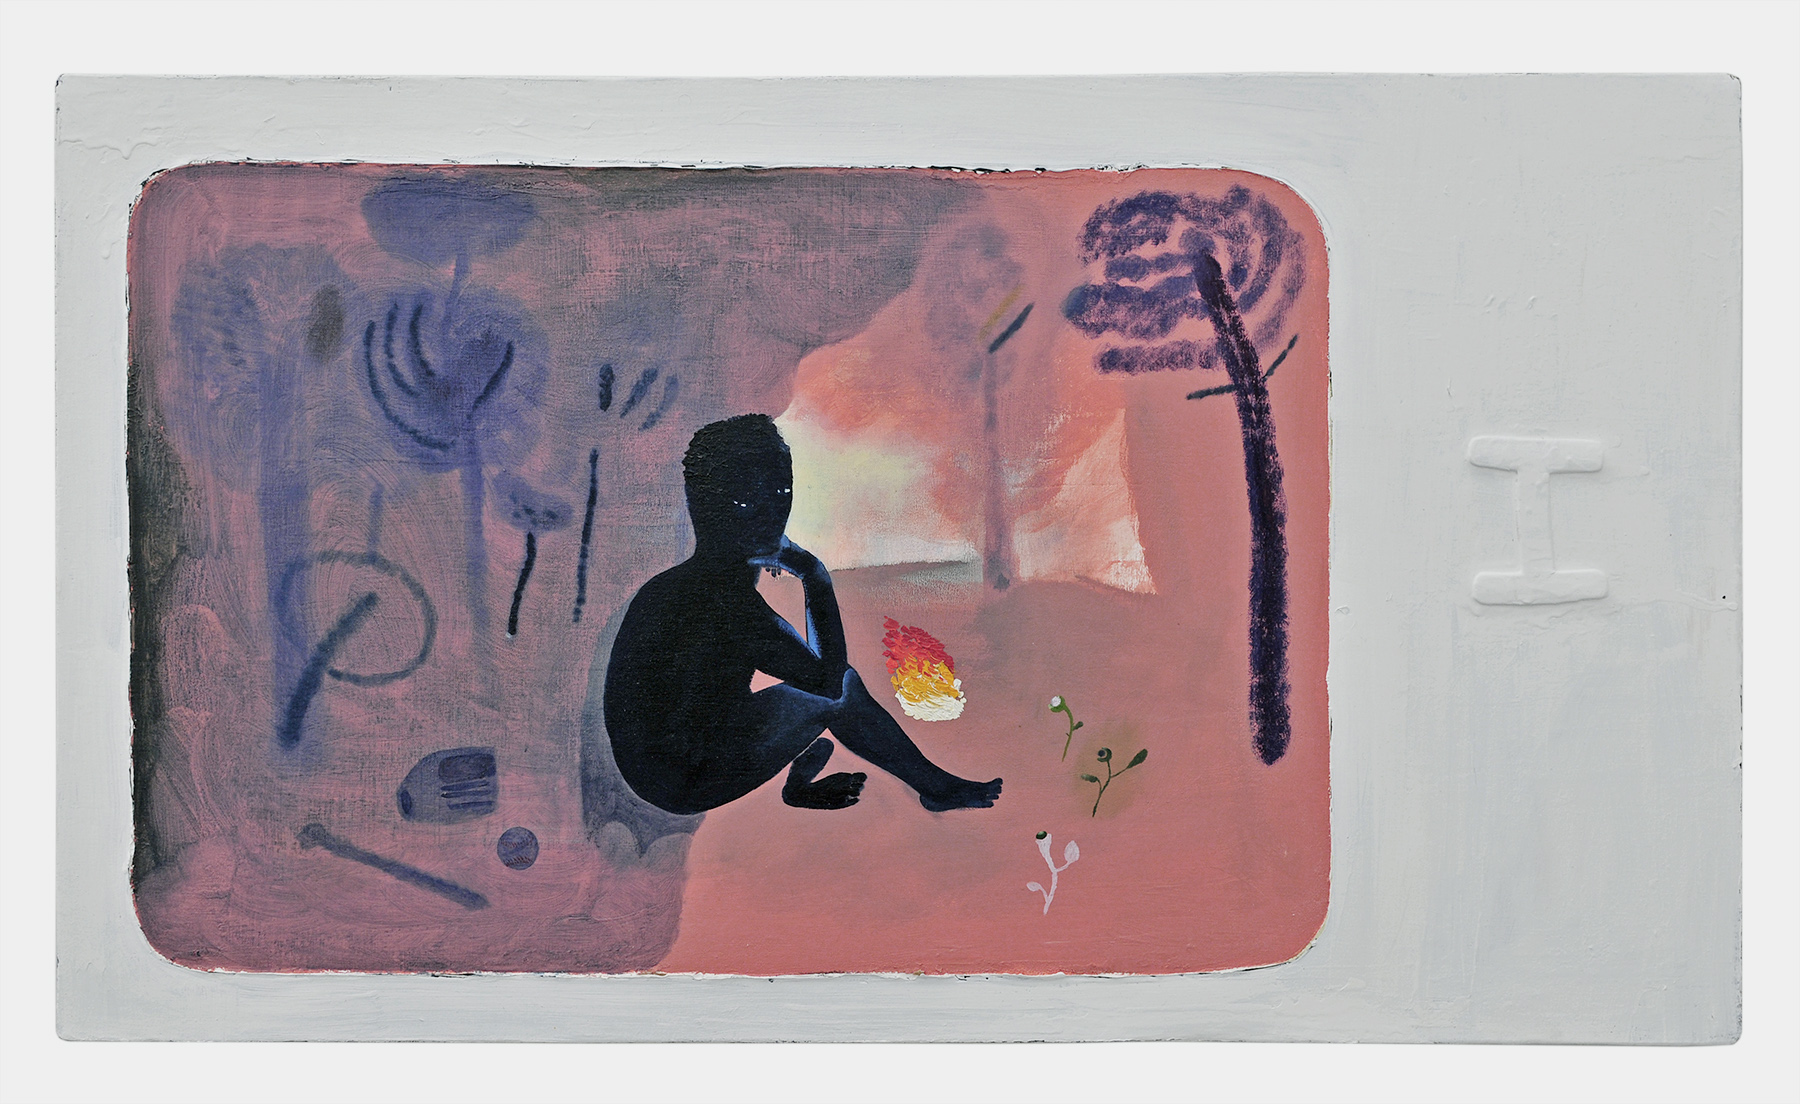 Kenny_Rivero-04_Lonche_with_the_Grass_2013_Oil_acrylic_latex_paint_and_collage_on_canvas